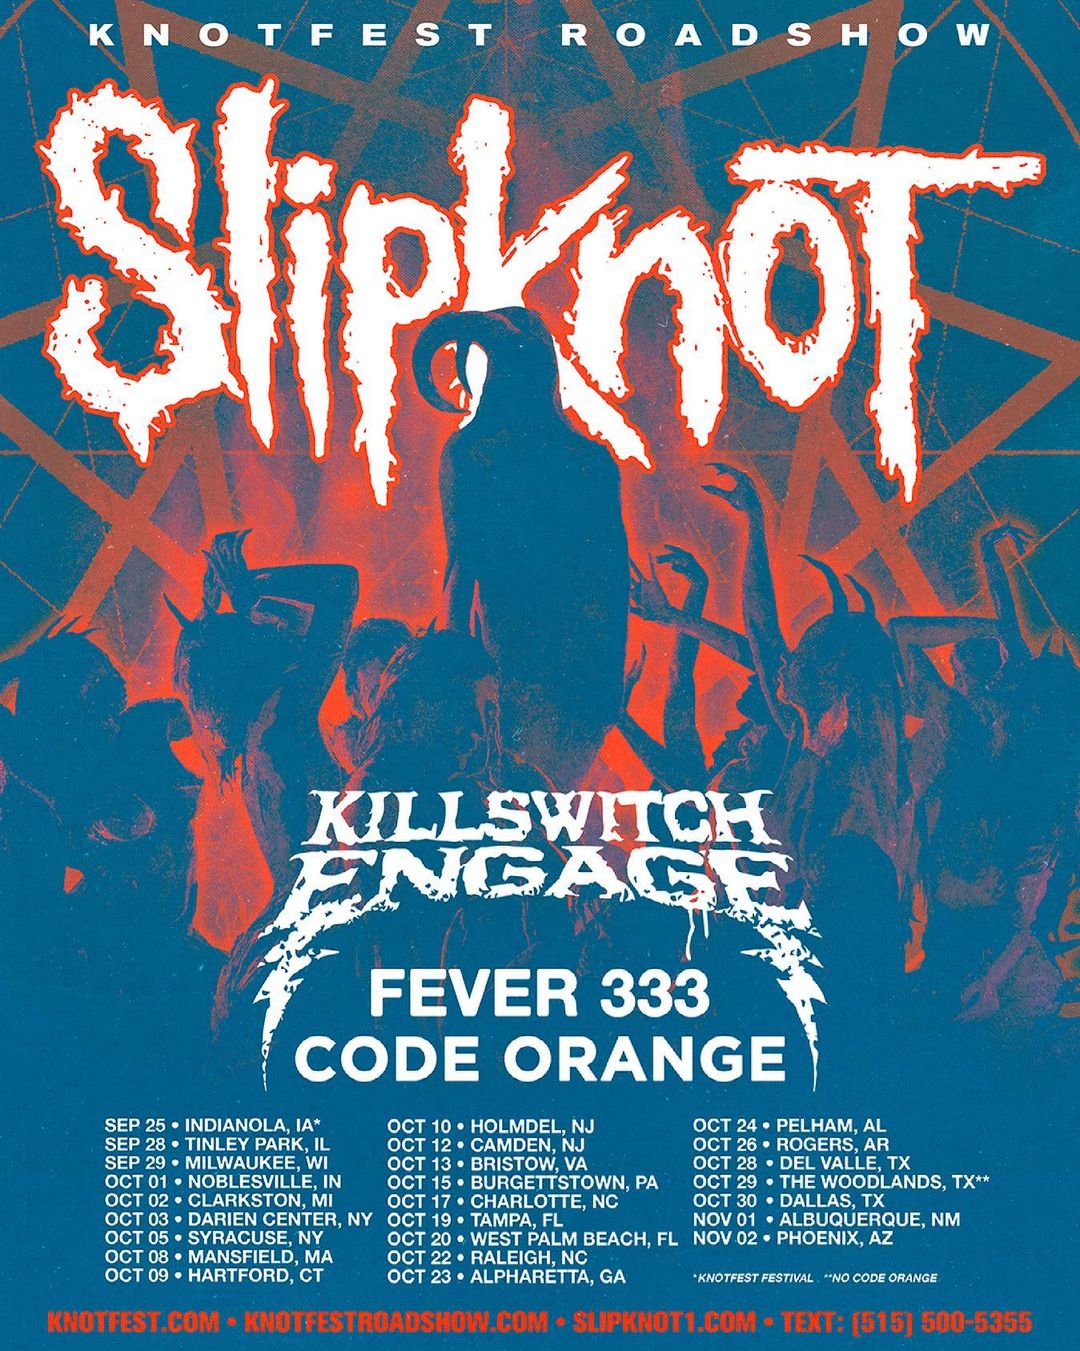 will slipknot tour in the us